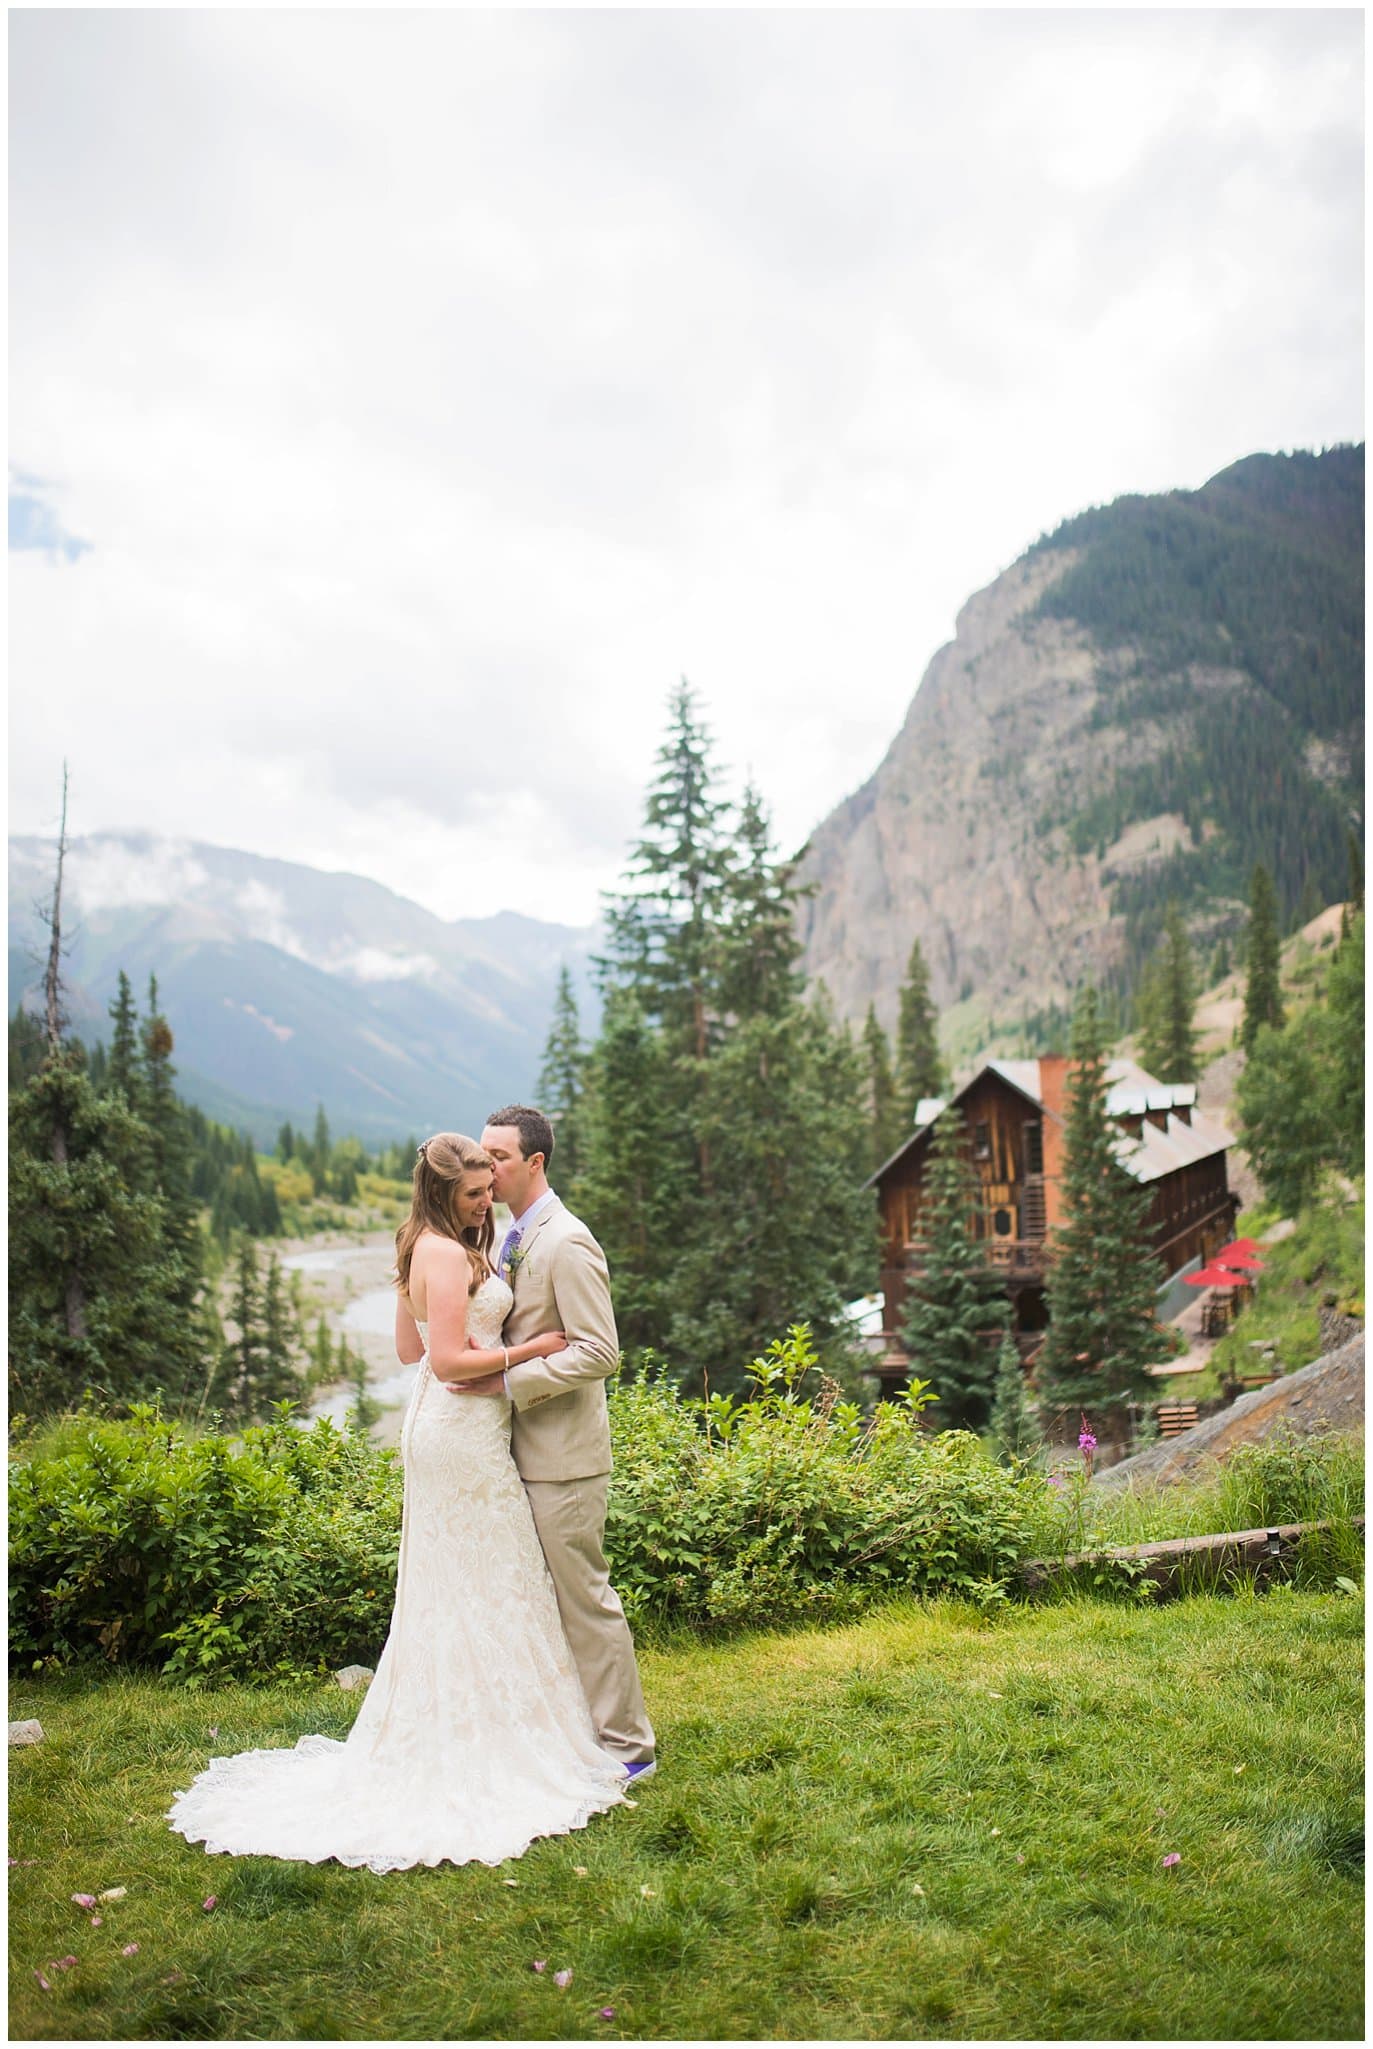 Bride and groom overlooking lodge at Eureka Lodge Wedding by Silverthorne Wedding Photographer Jennie Crate